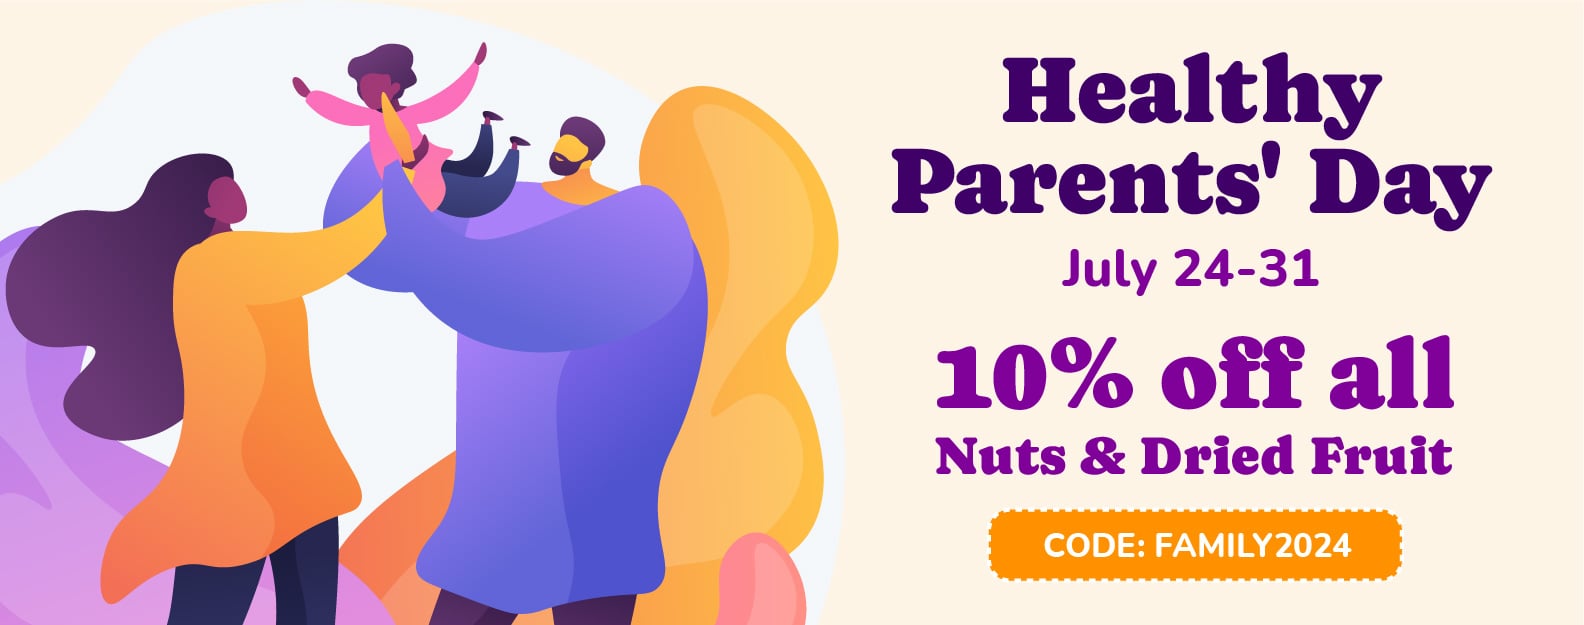 Healthy Parents' Day Dates of the promo: July 24 - July 31 [web] HEALTHY PARENTS' DAY! Promo code: FAMILY2024 10% OFF ALL NUTS AND DRIED FRUIT